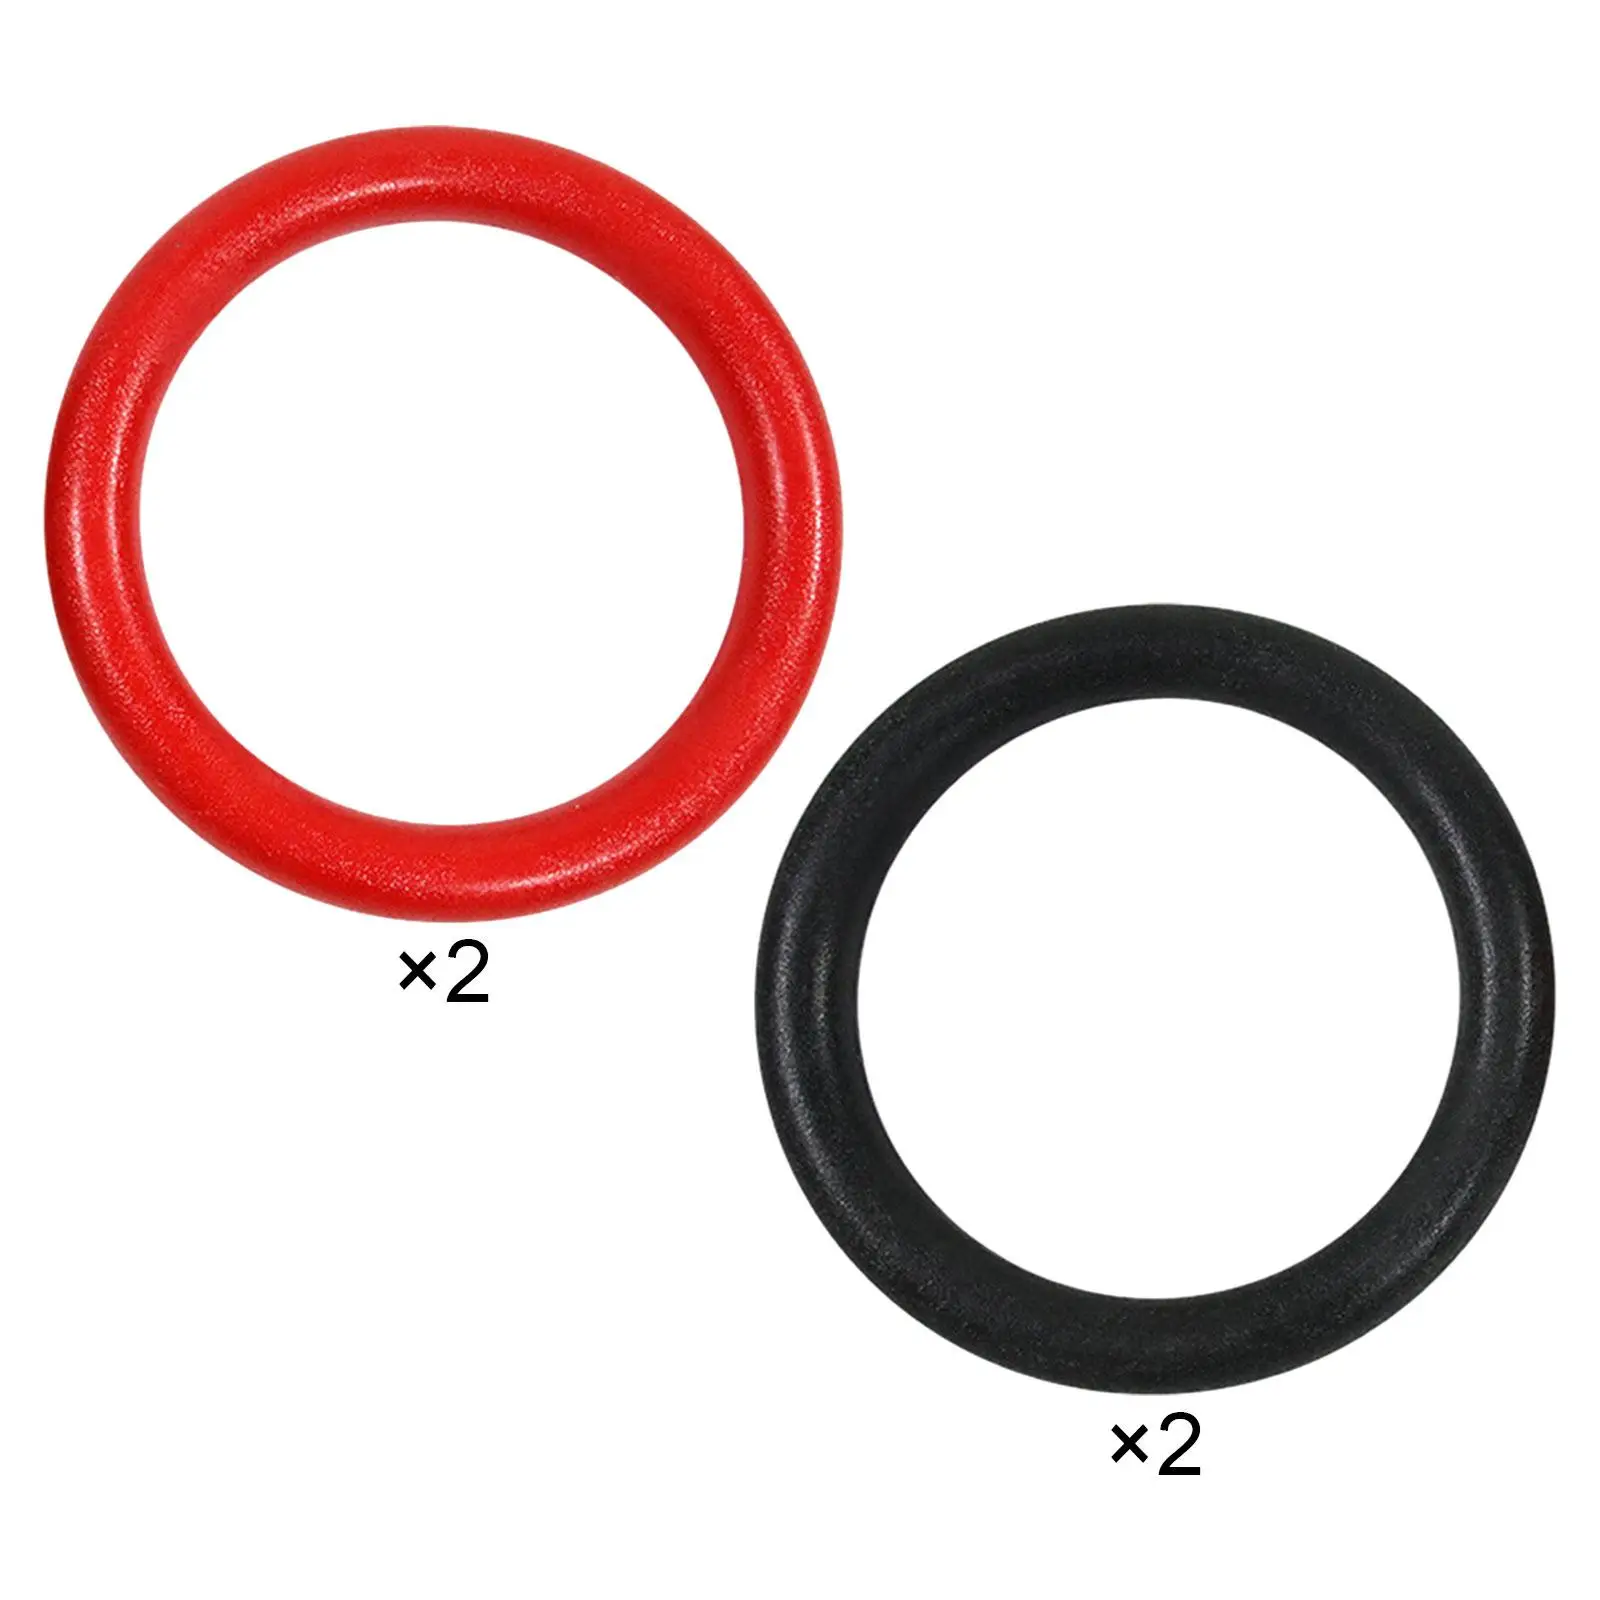 2x Gymnastics Rings for Men Women Strength Training Pull up Exercise Rings for Fitness Equipment Home Gym Full Body Workout